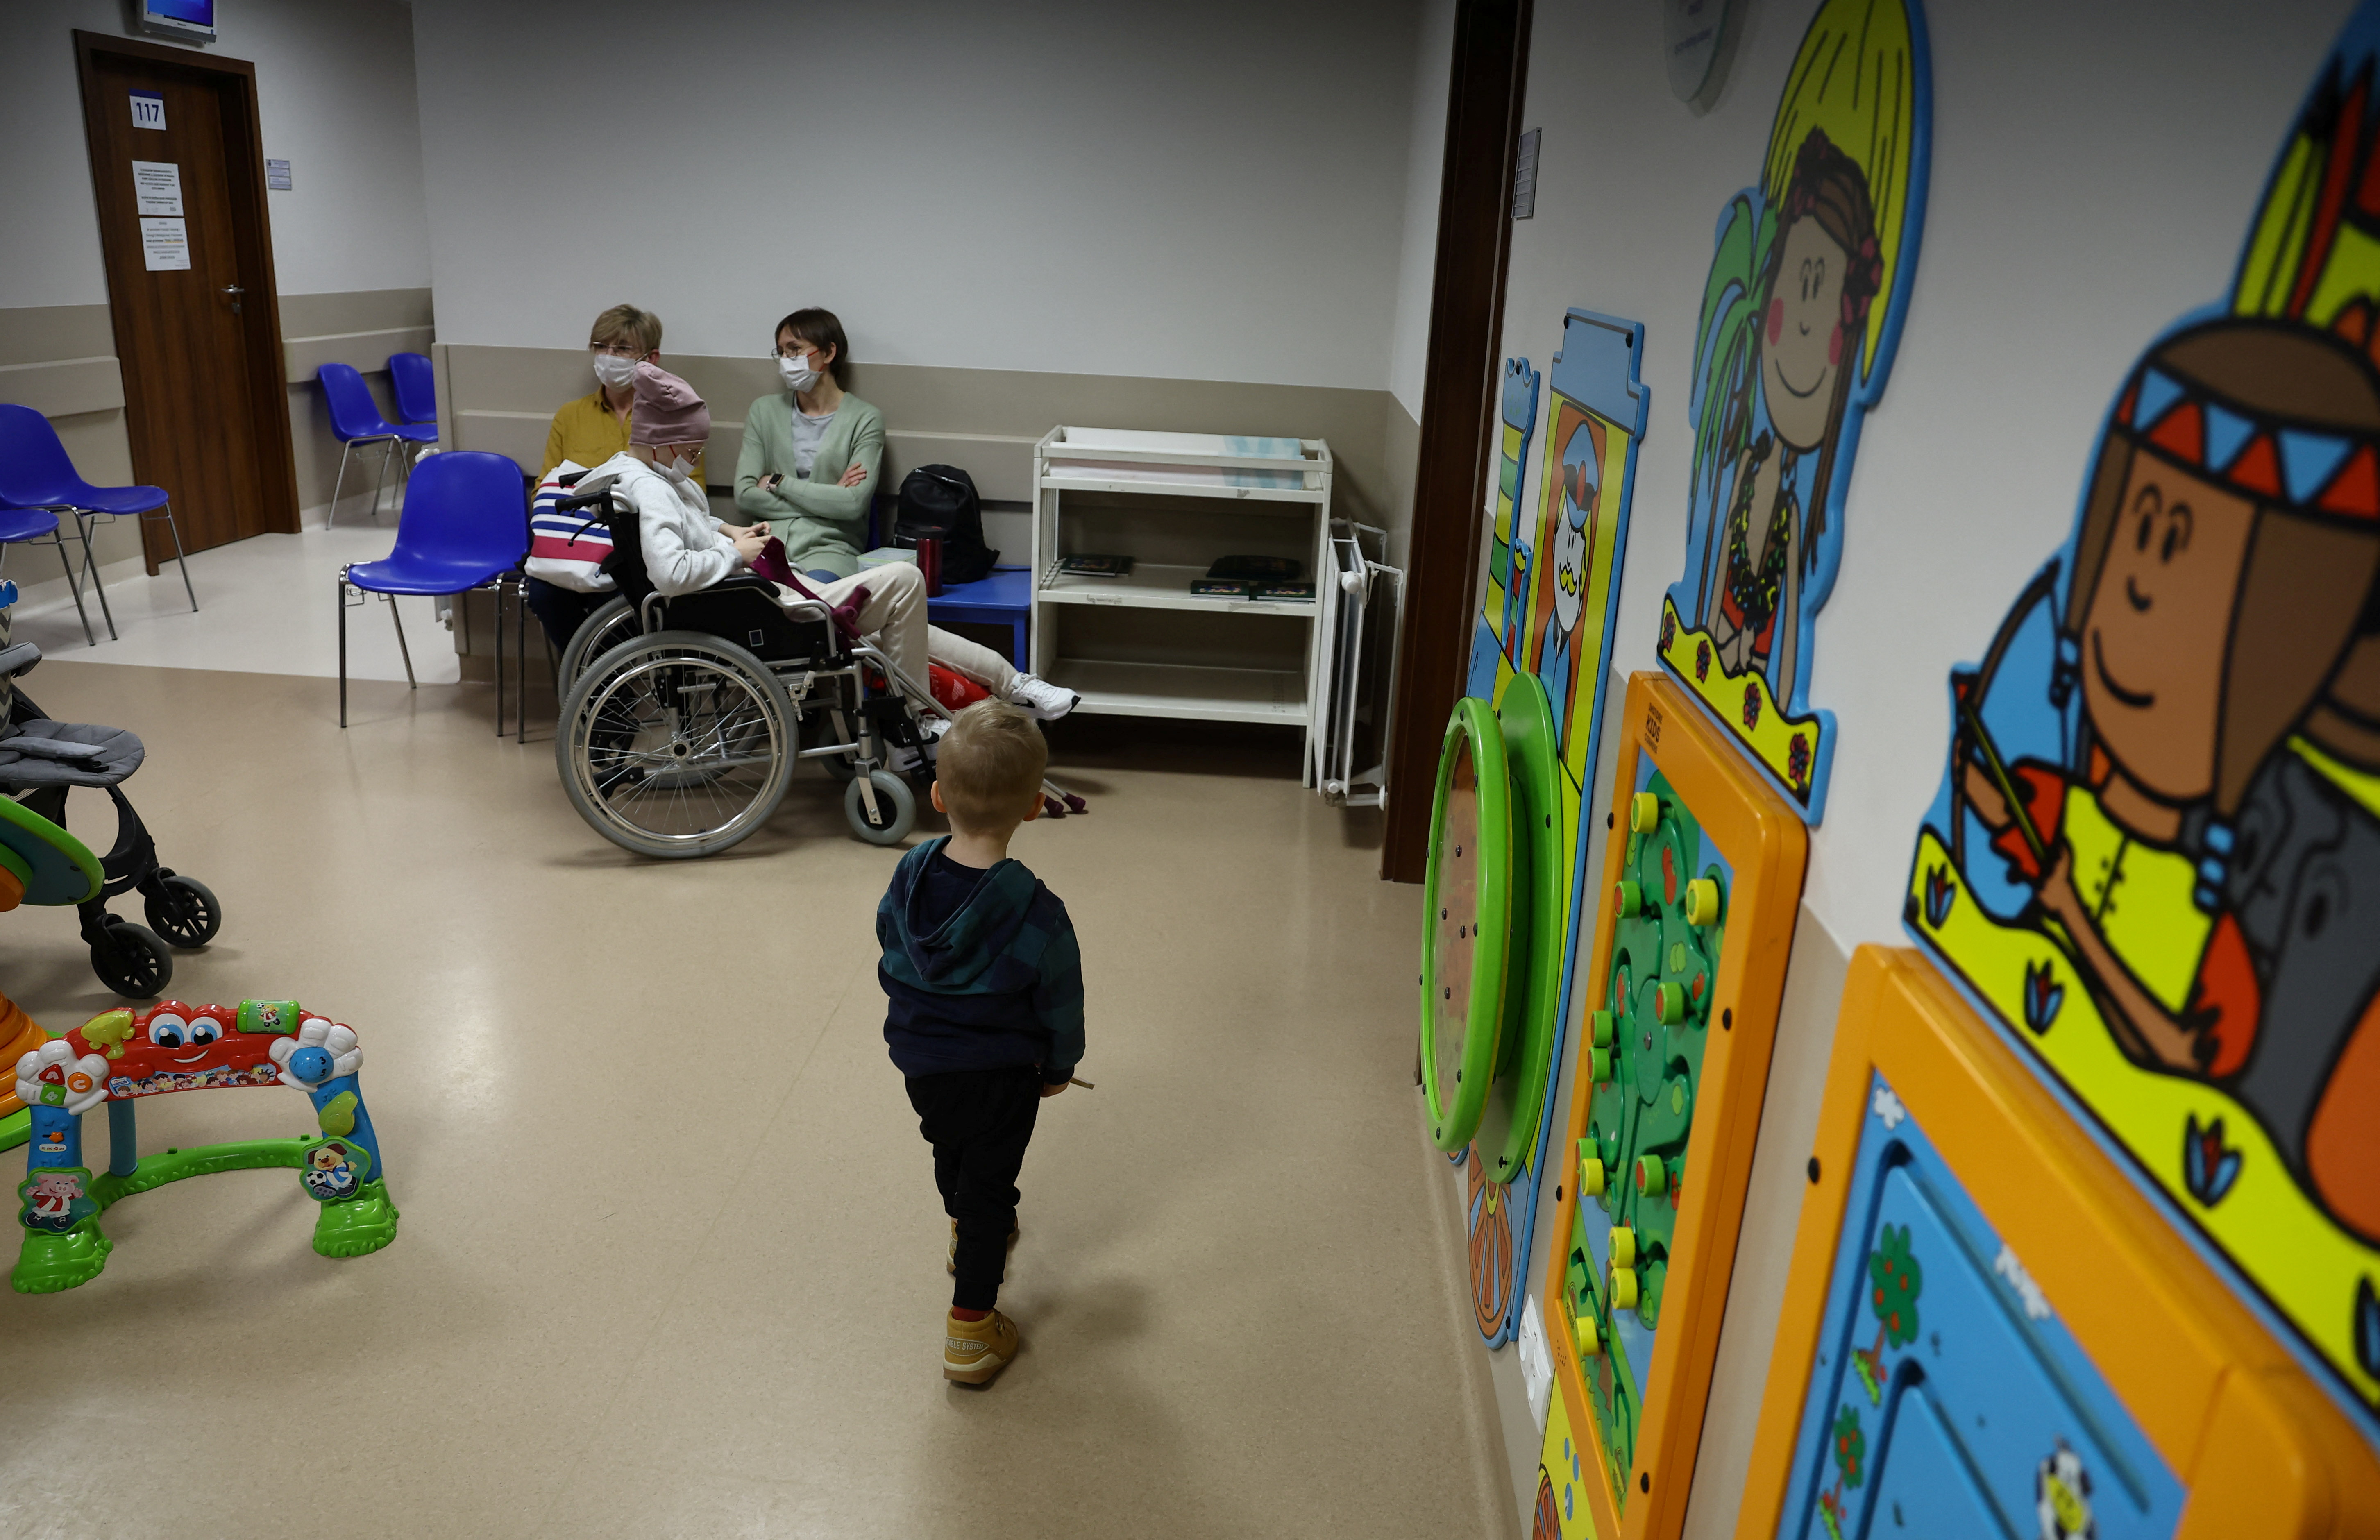 People wait outside the examination room of children's oncology ward at the Institute of Mother and Child hospital, in Warsaw